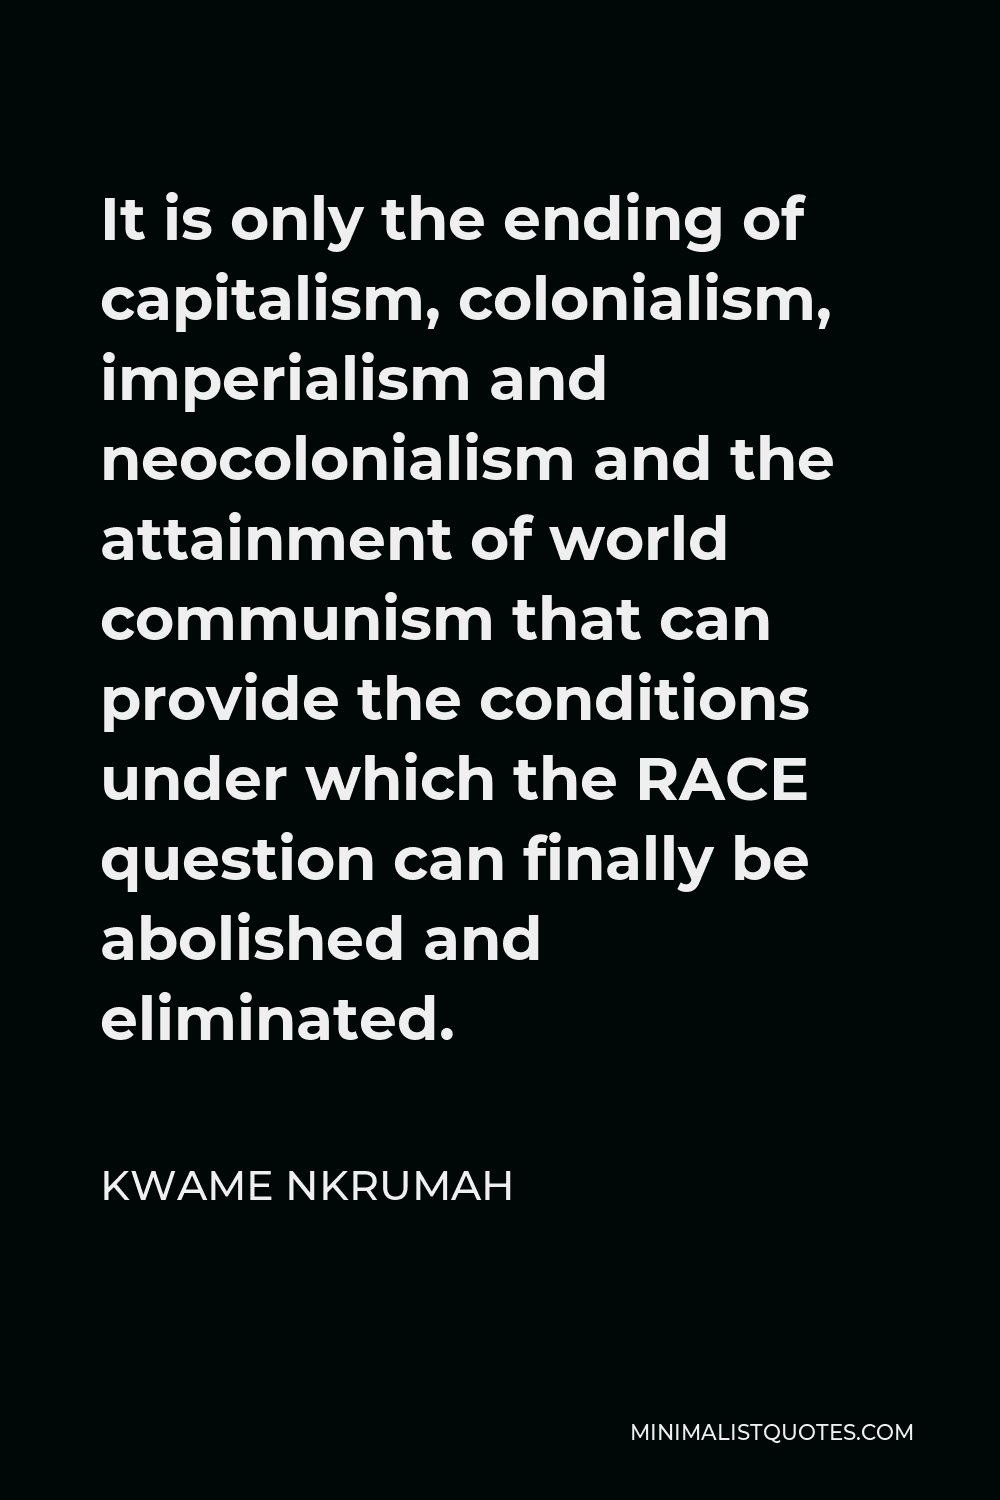 Kwame Nkrumah Quote - It is only the ending of capitalism, colonialism, imperialism and neocolonialism and the attainment of world communism that can provide the conditions under which the RACE question can finally be abolished and eliminated.